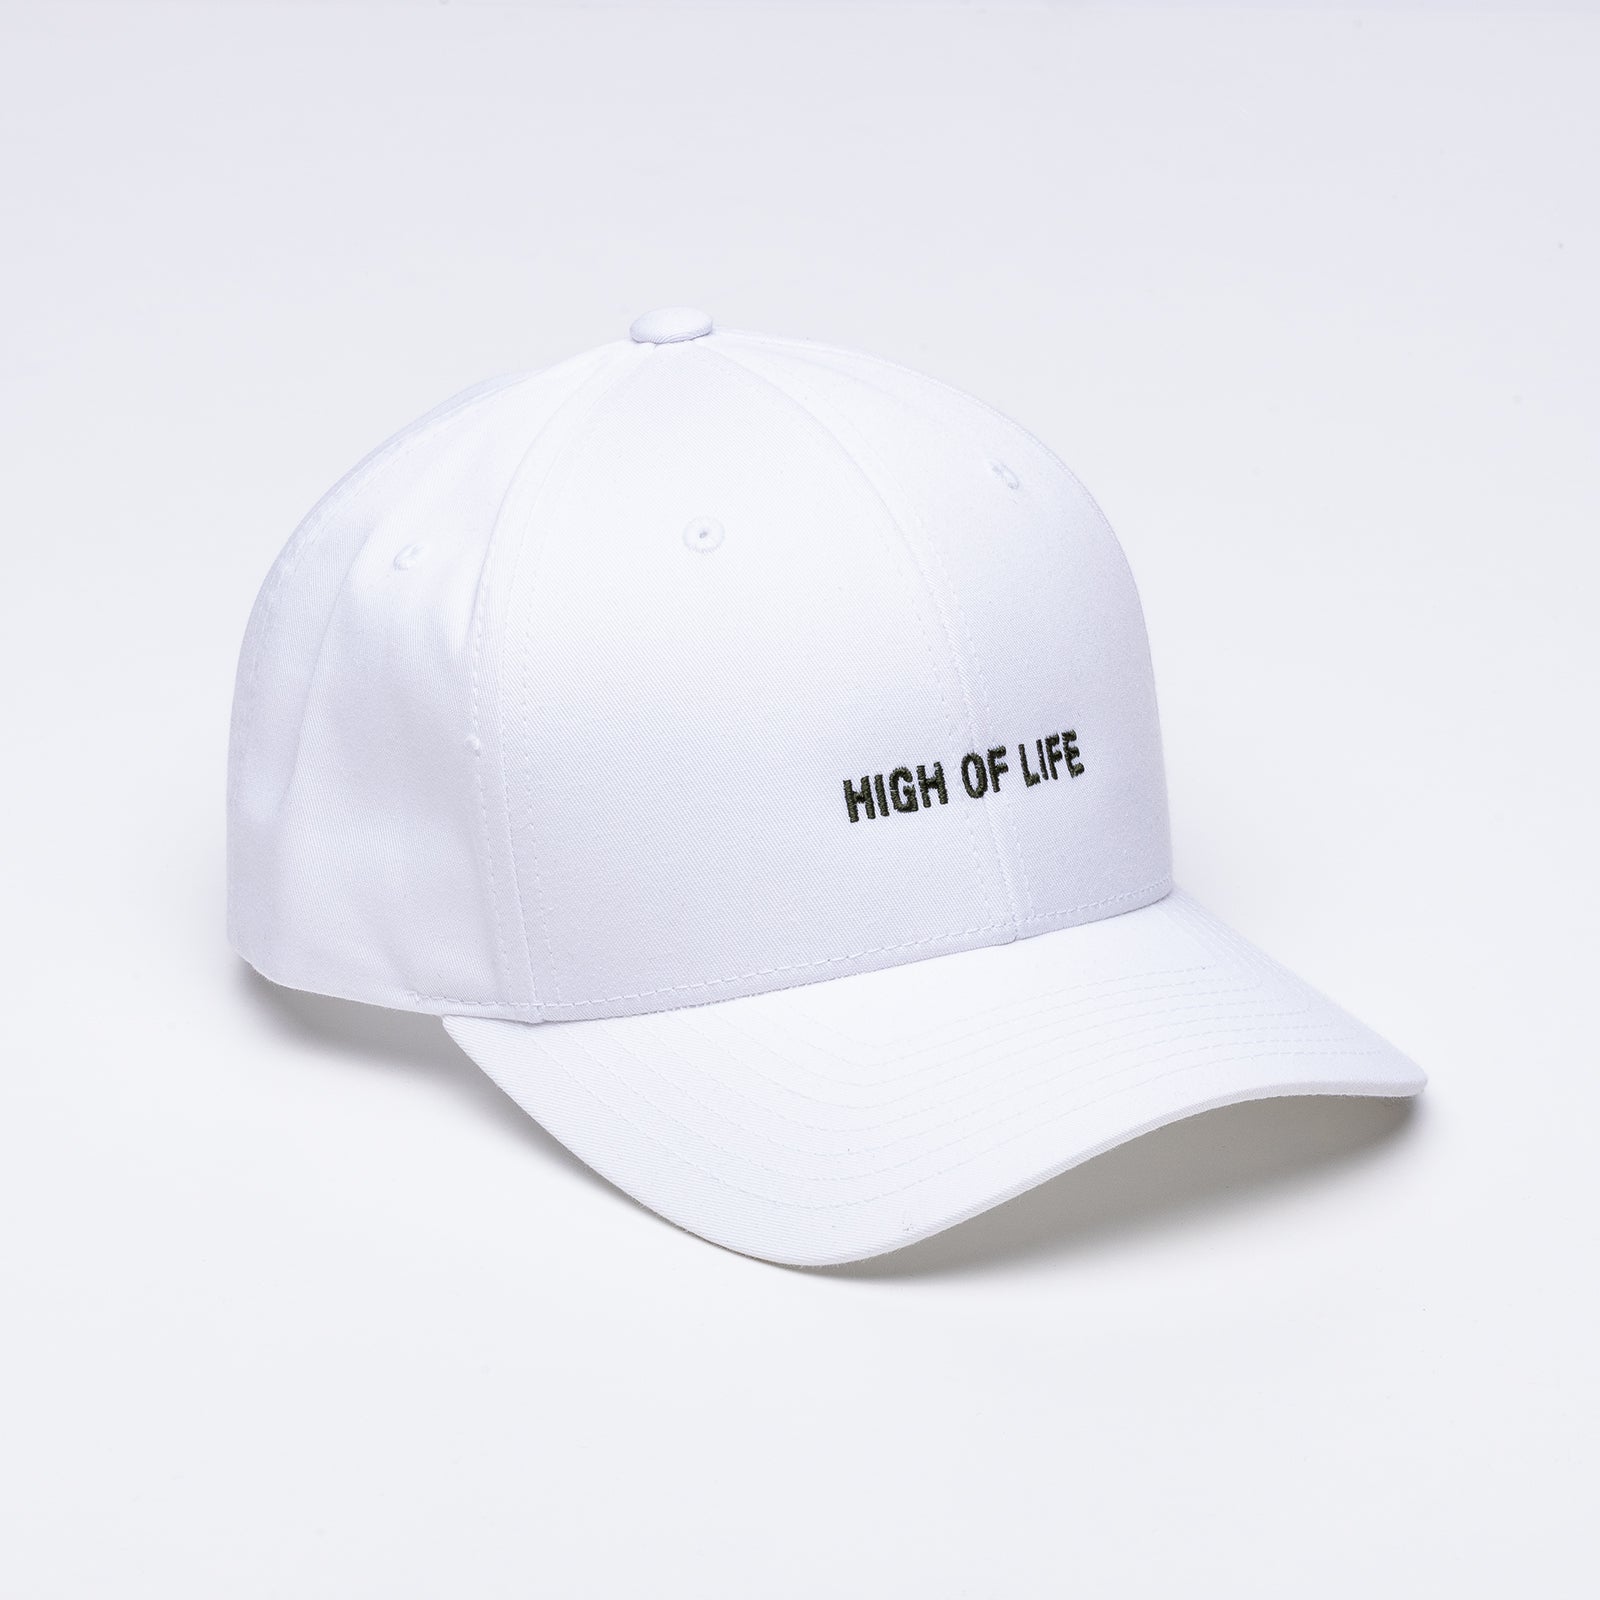 Norm cap high of life white